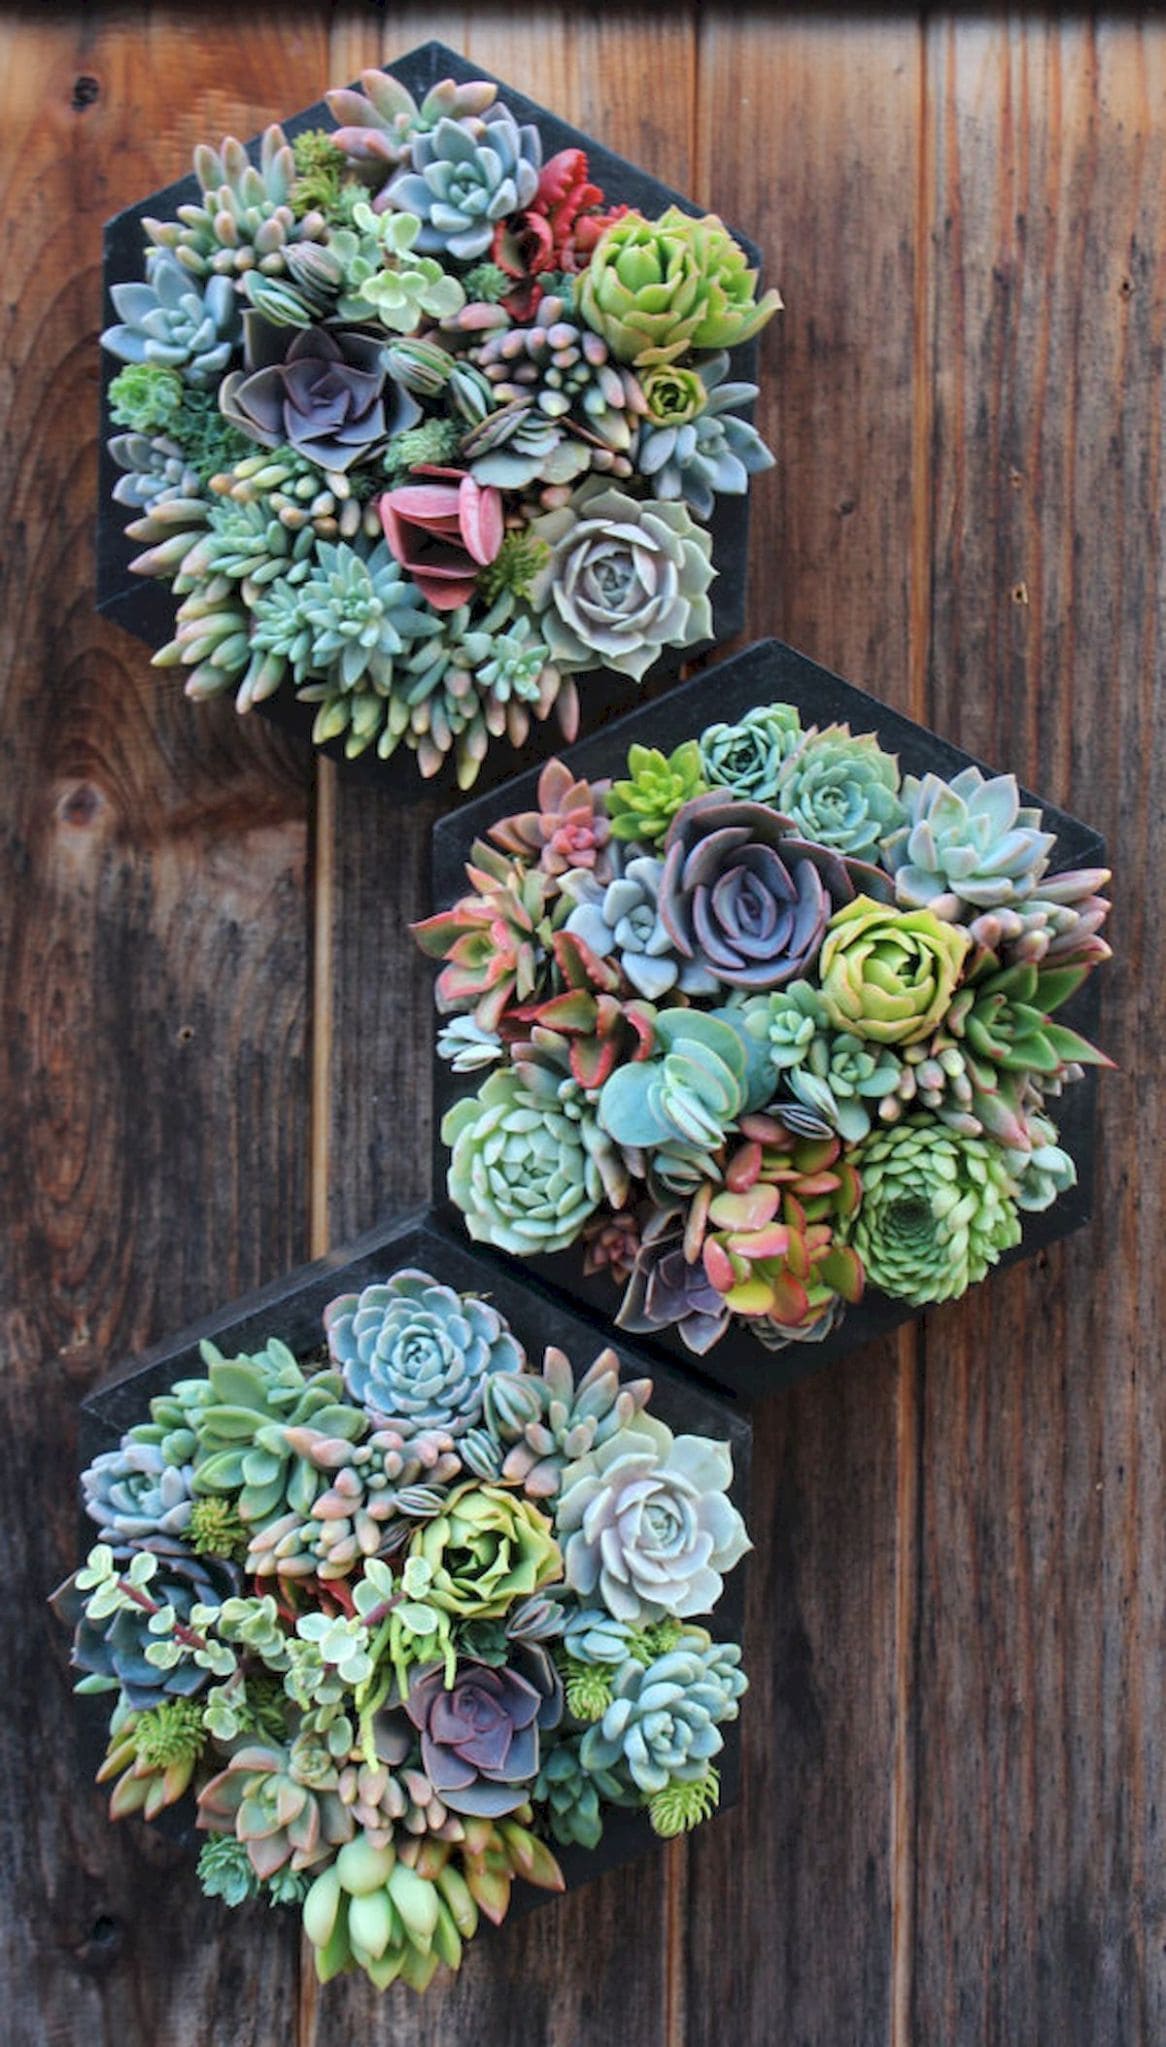 25 fascinating ideas to build a hanging mini succulent garden - 89